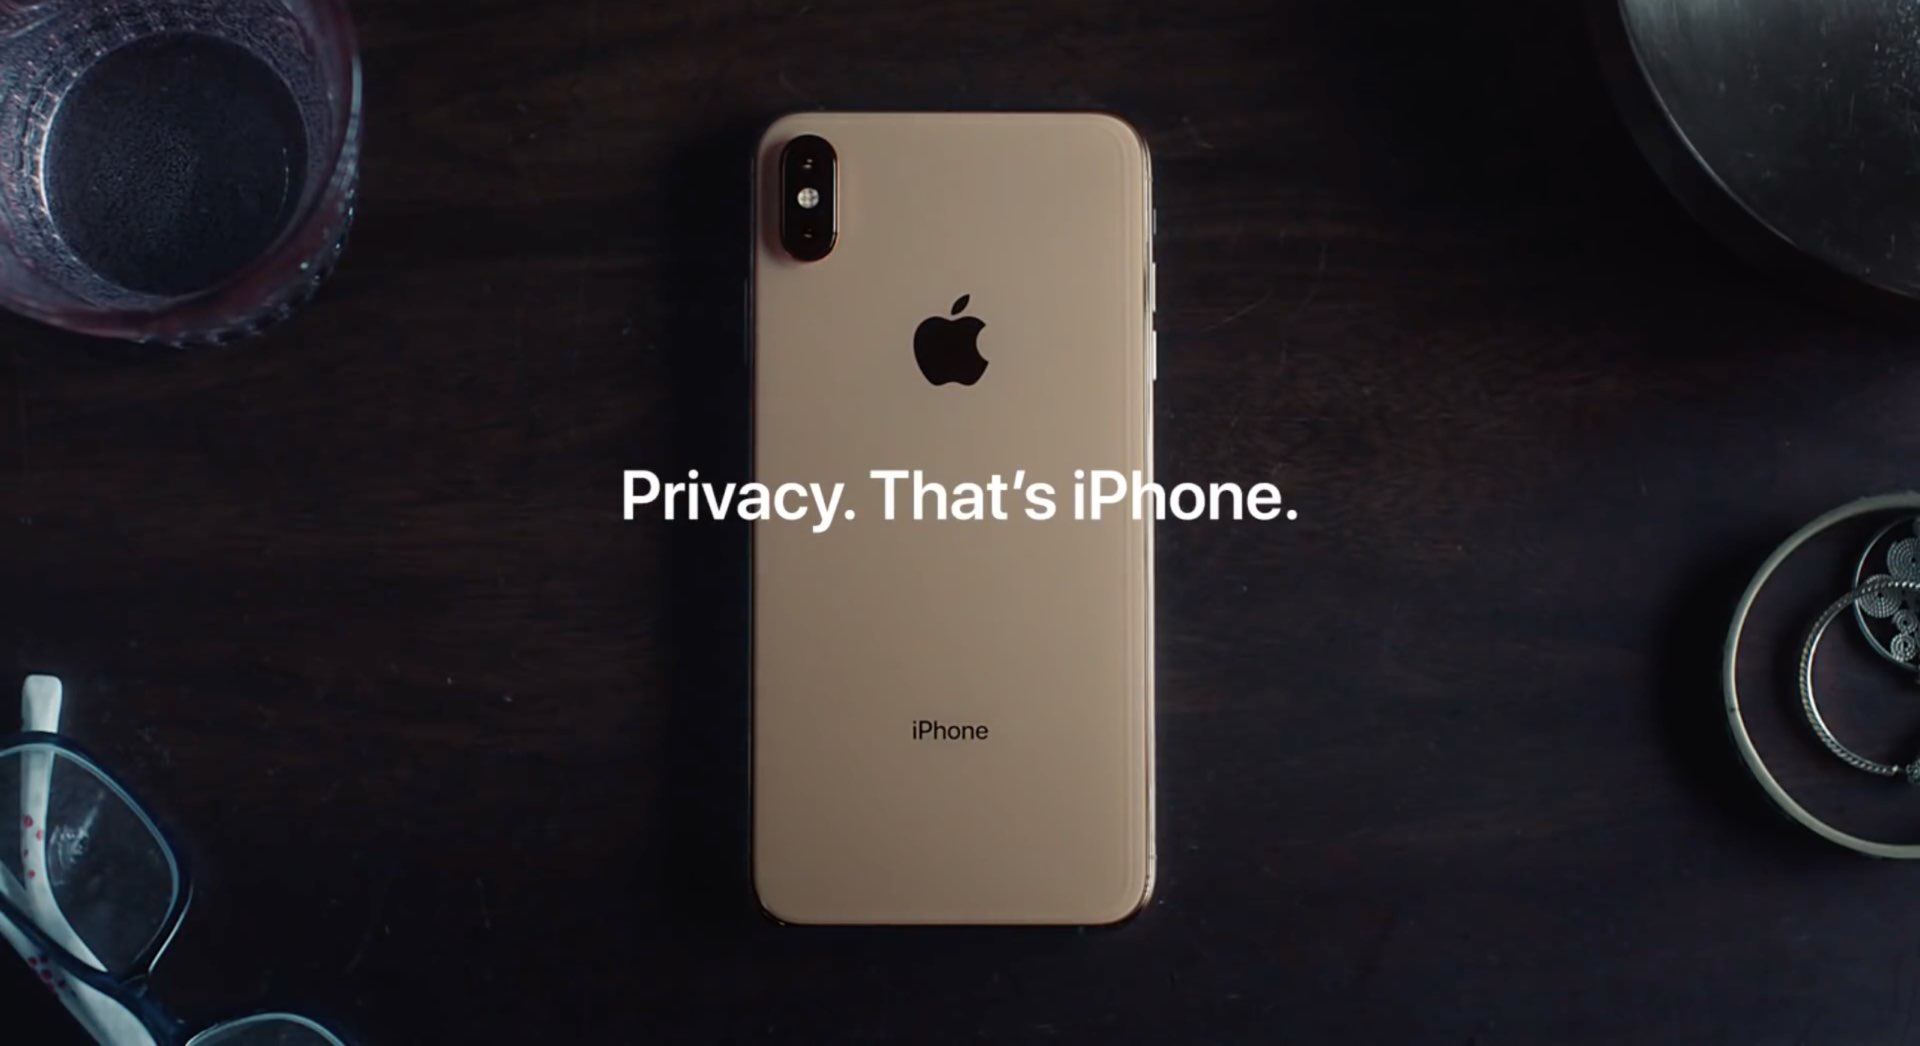 A still from an Apple ad showing the back of an iPhone 12 XS Max with the words "Privacy. That's iPhone" shown 